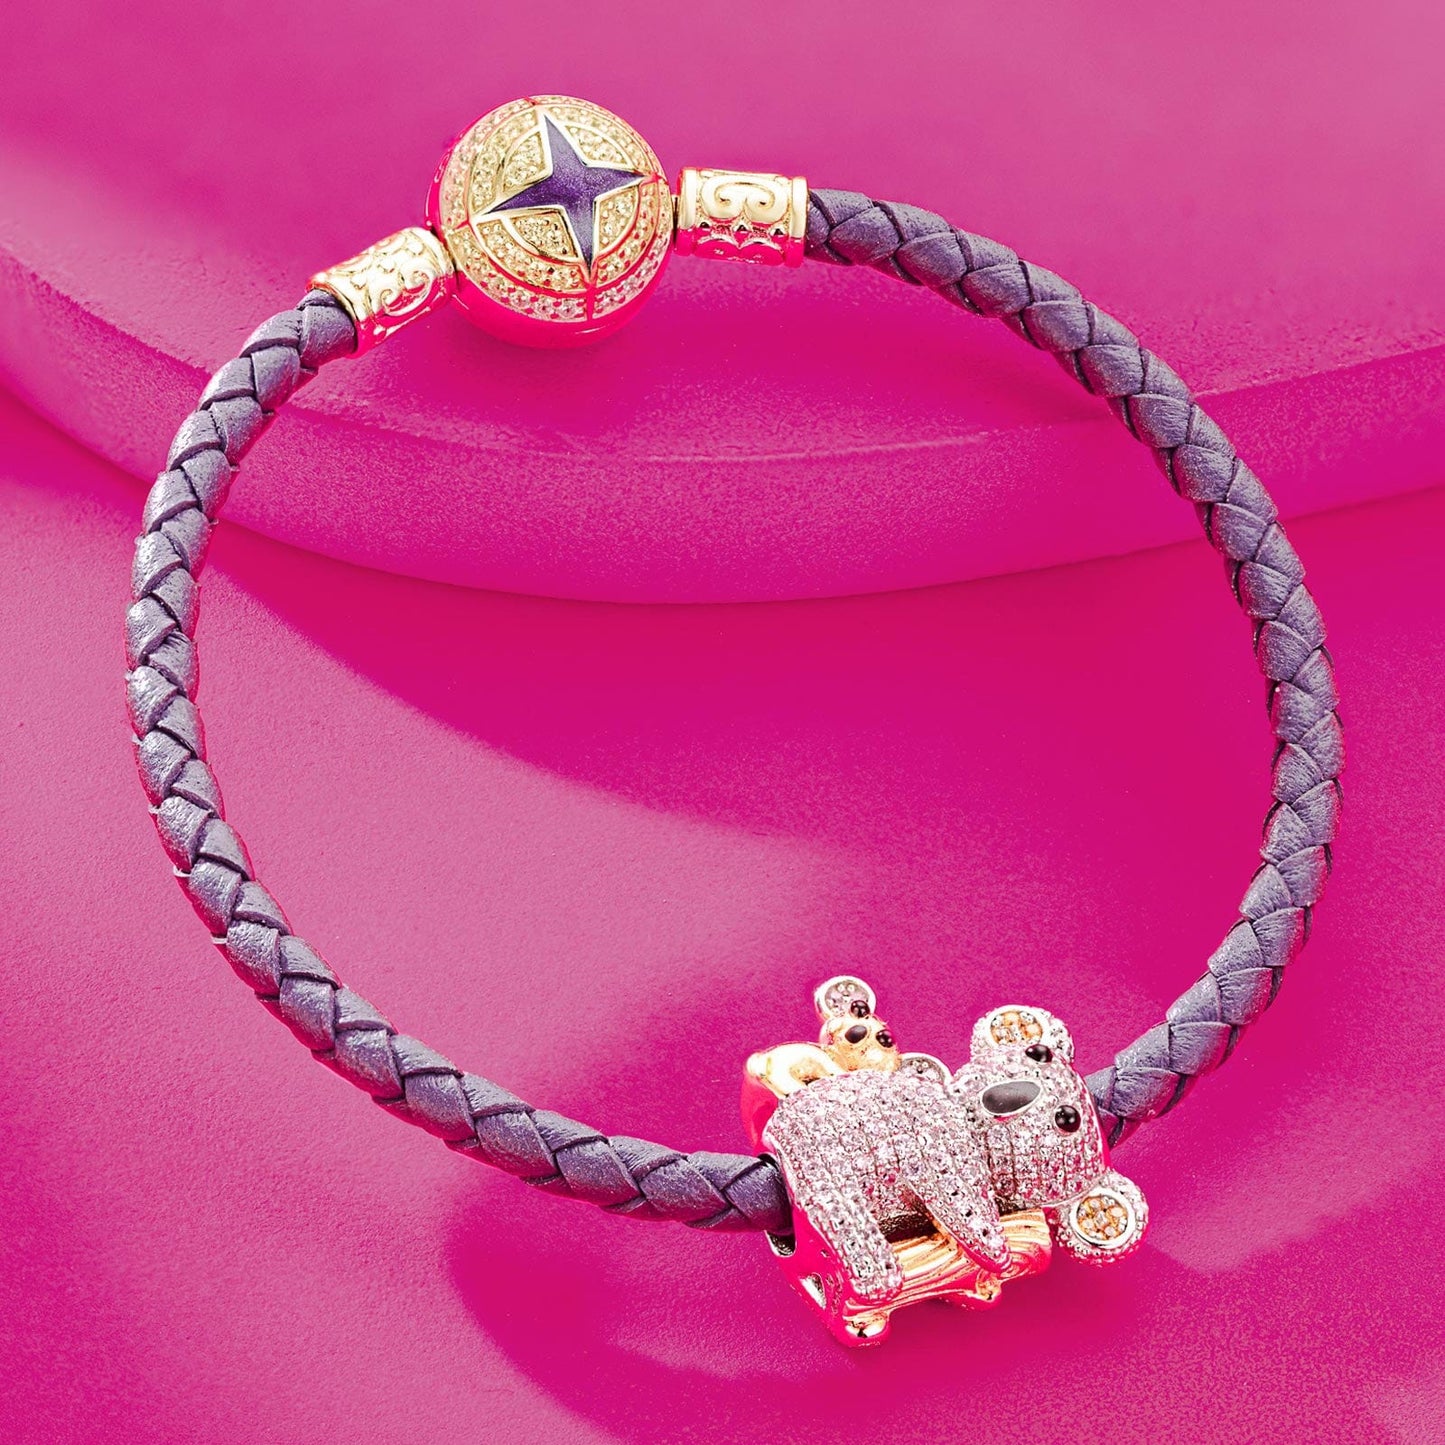 Tarnish-resistant Silver Charms Bracelet Set With Sterling Silver Cute Koala In White Gold Plated